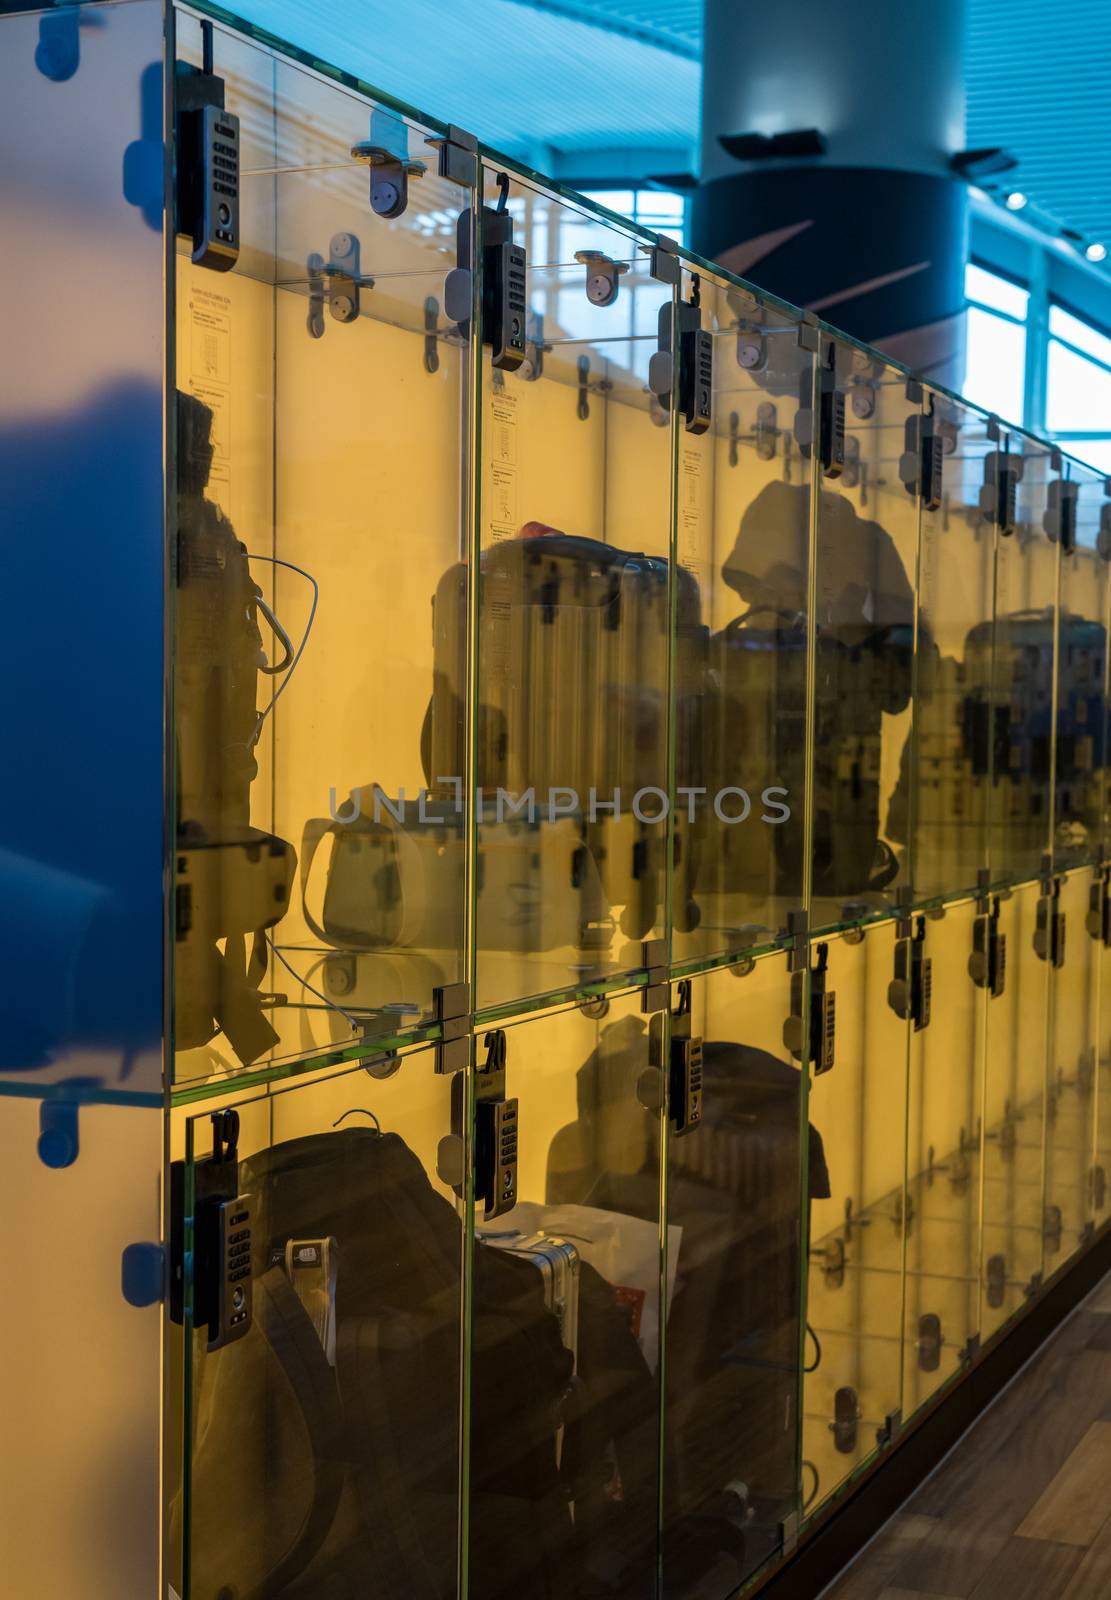 Luggage stored in transparent glass boxes in airport lounge by steheap